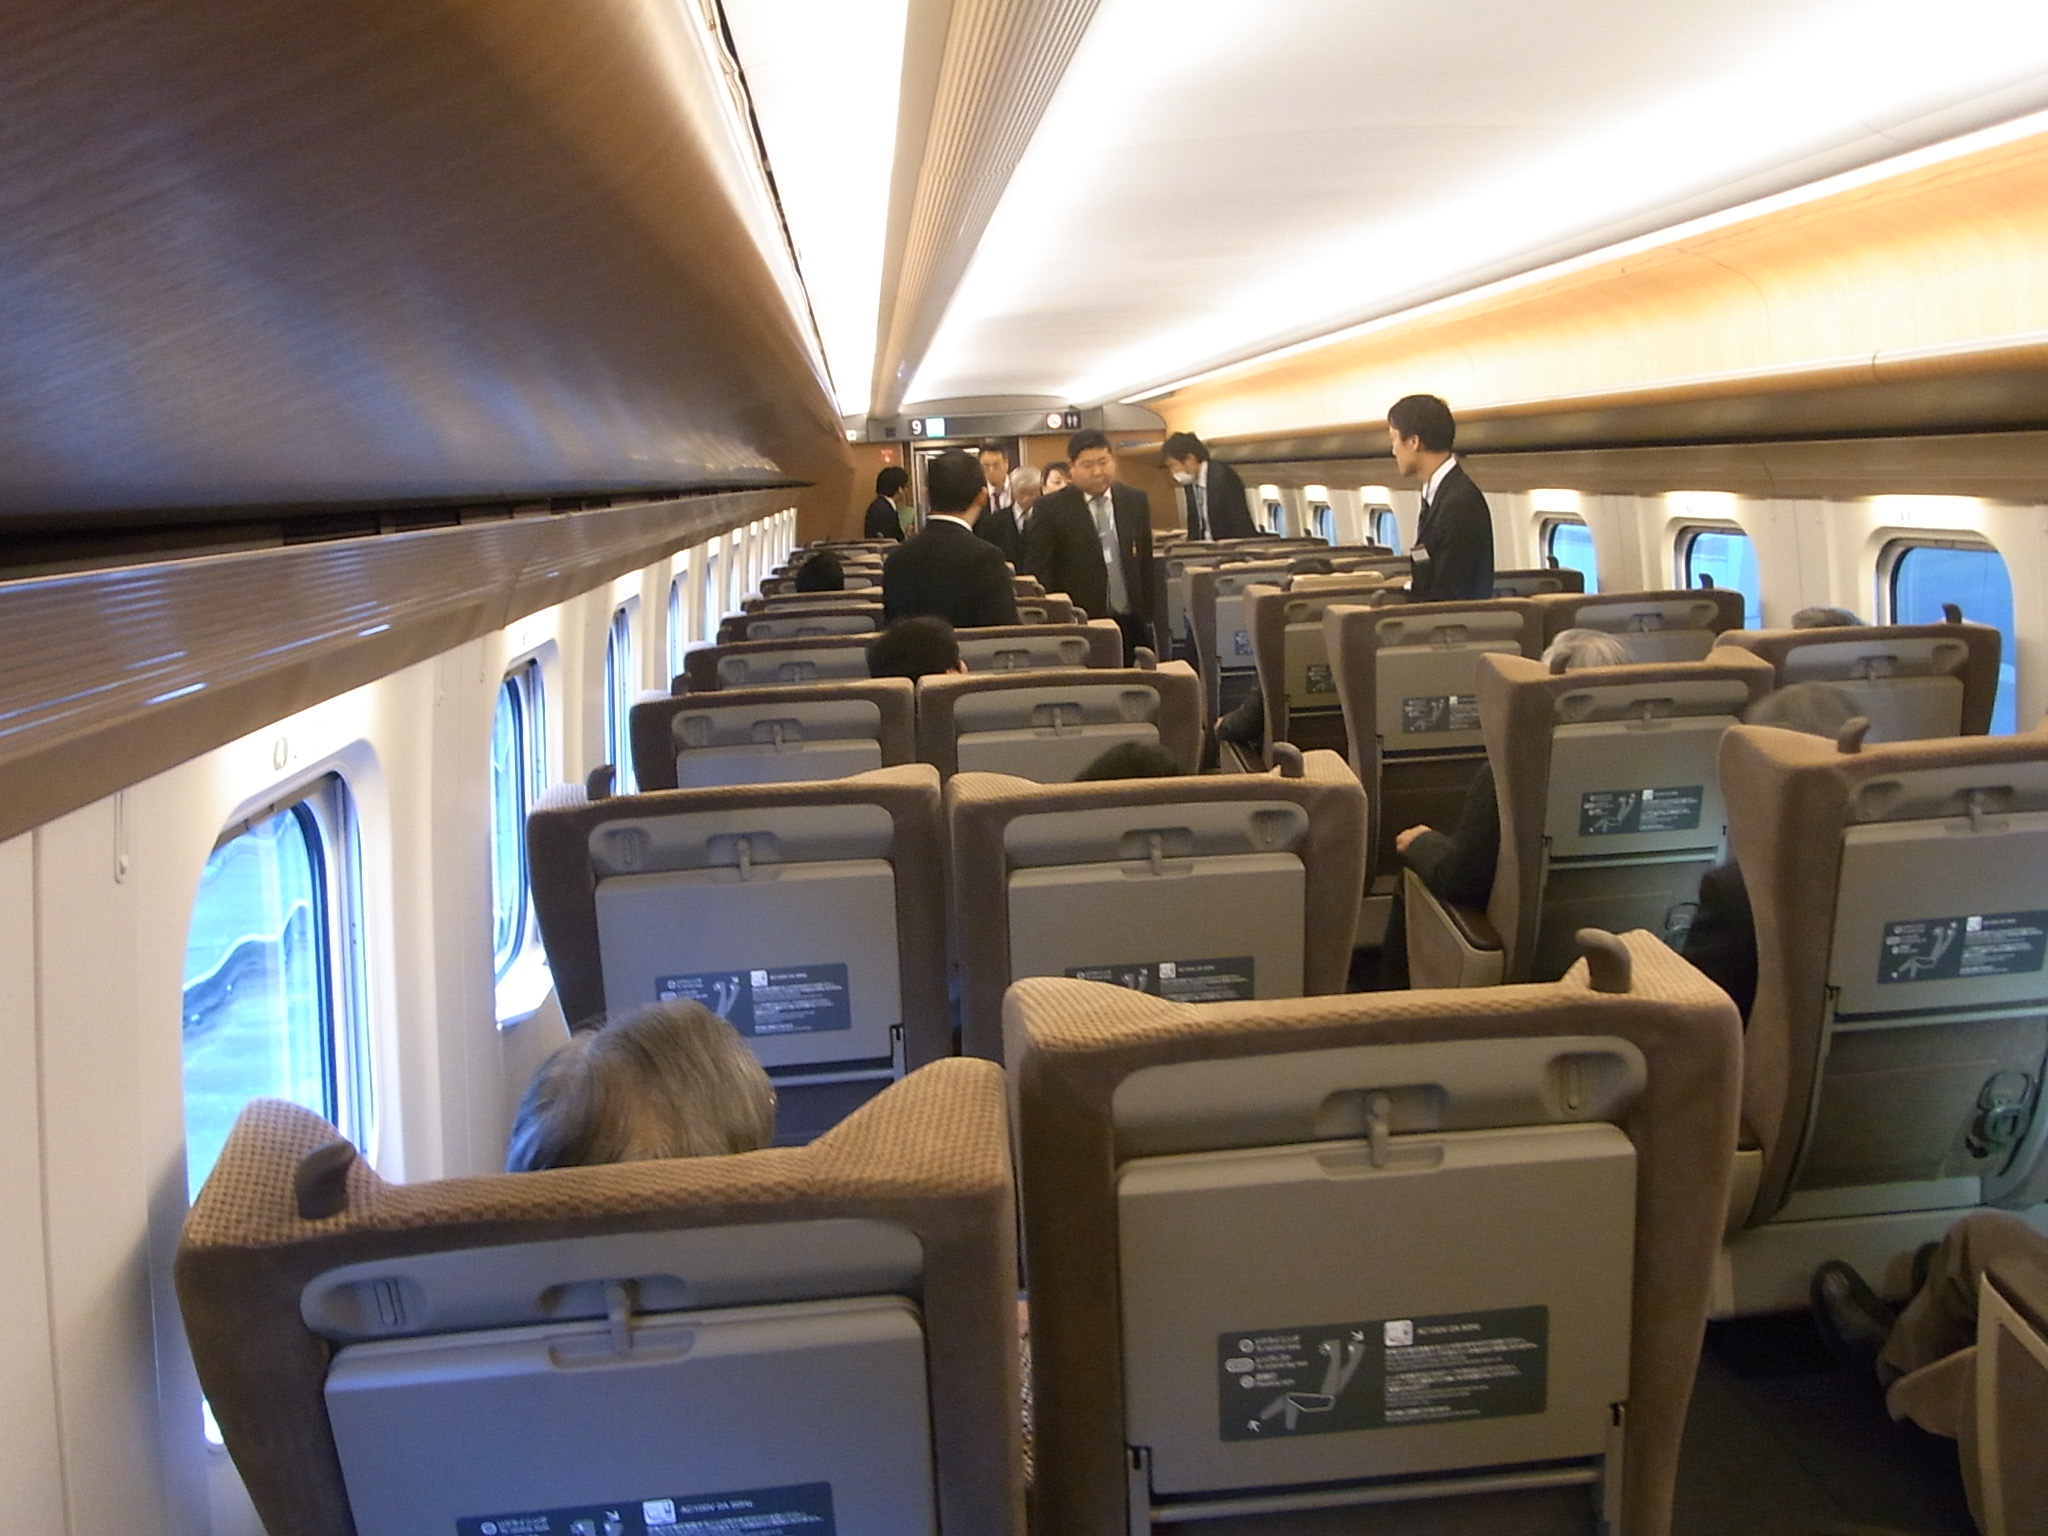 a very long plane that is filled with lots of windows